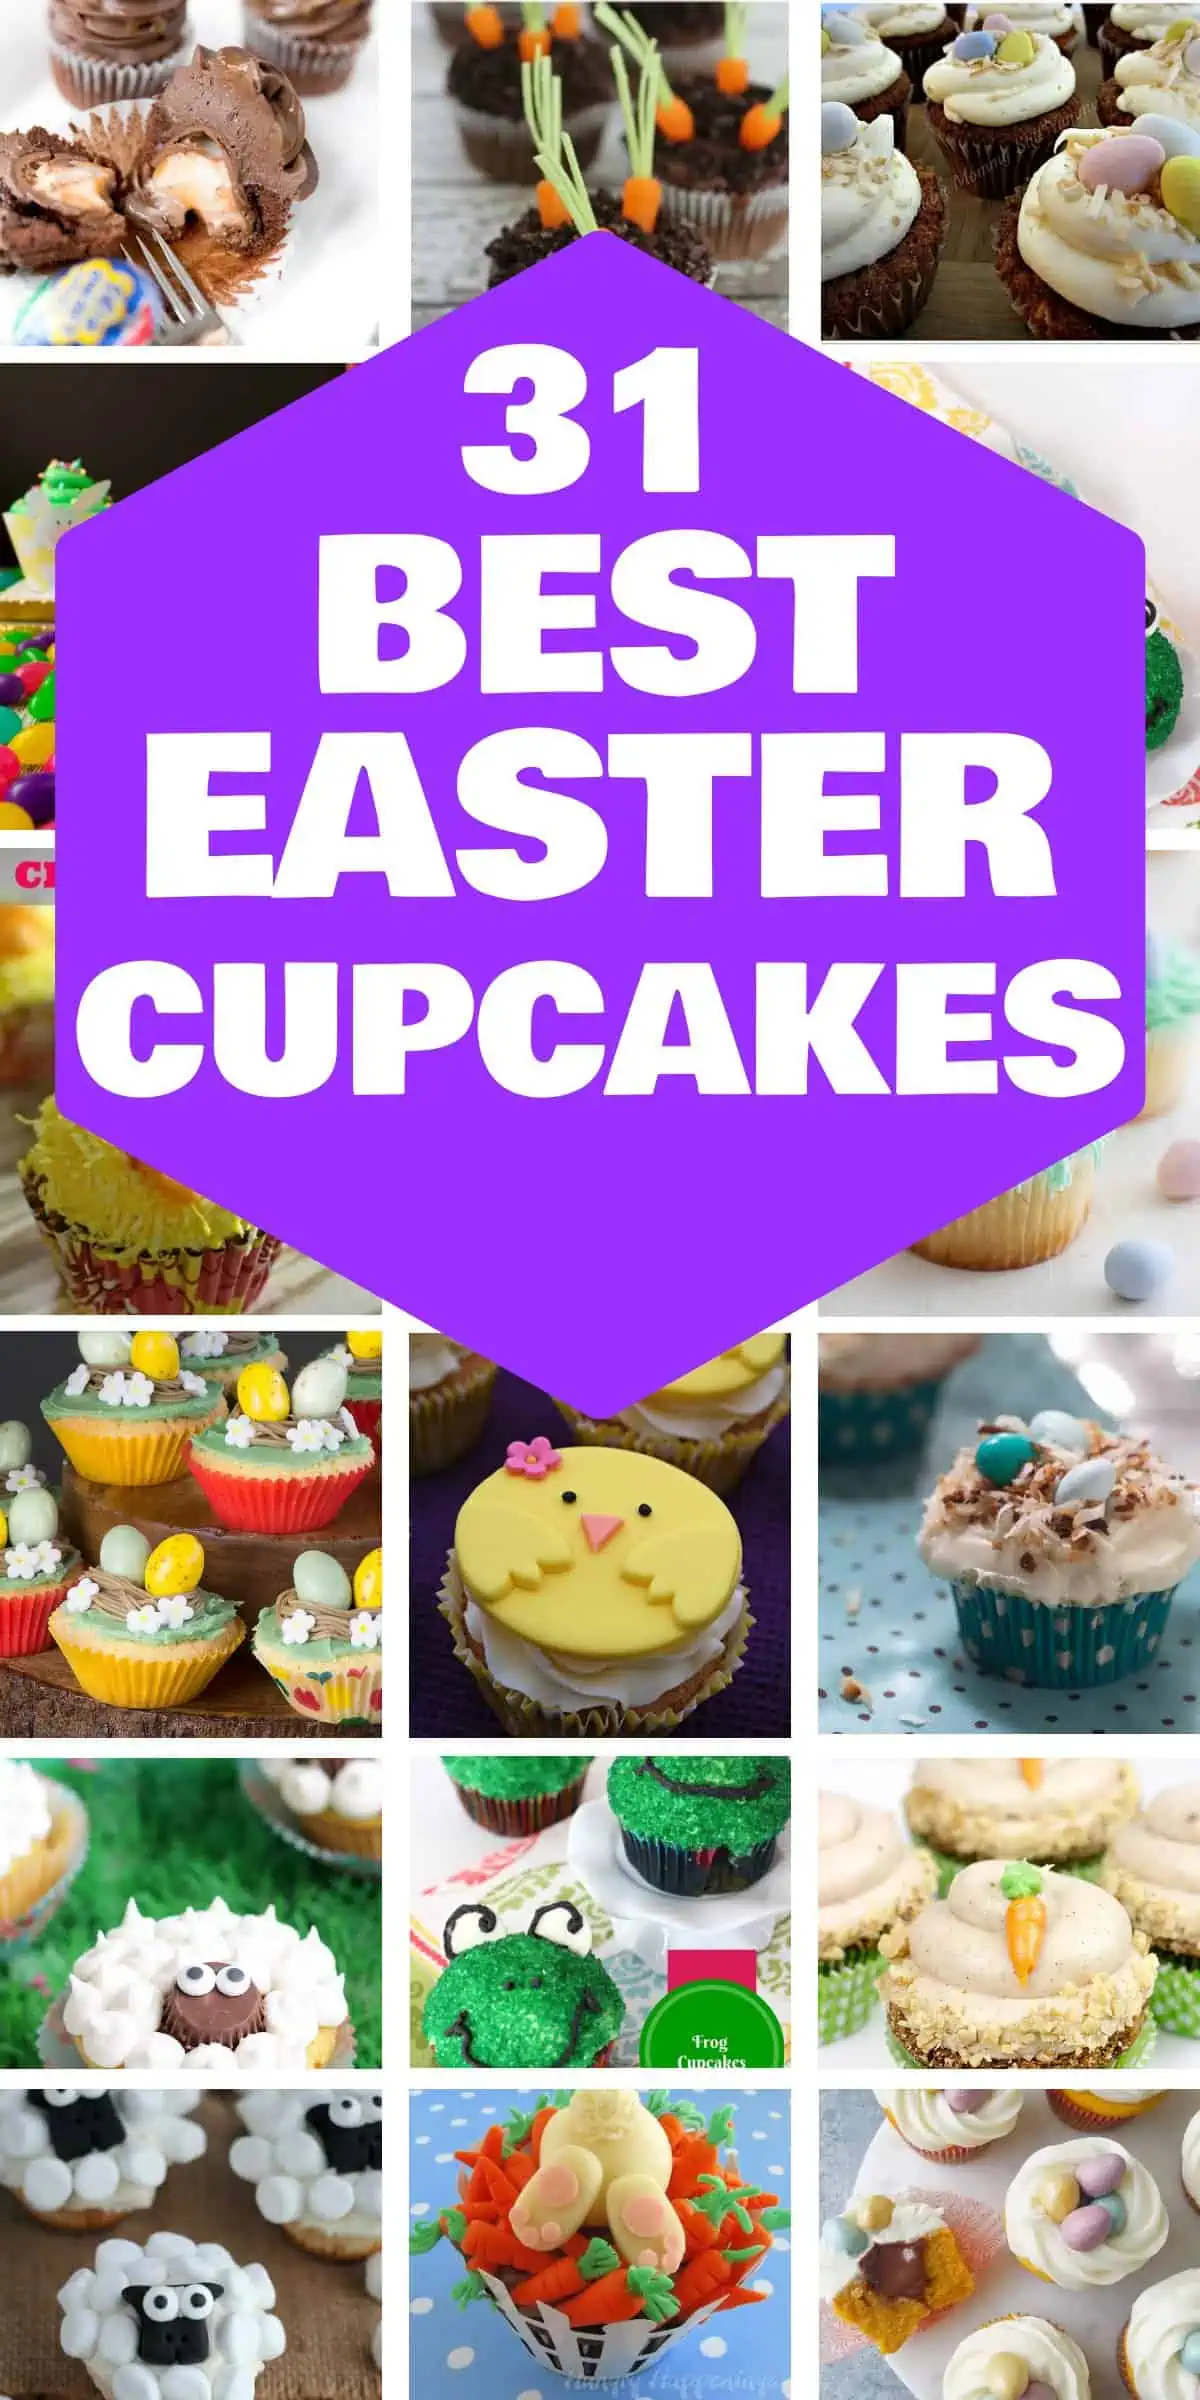 31 Cute Easter Cupcakes For a Delightful Celebration